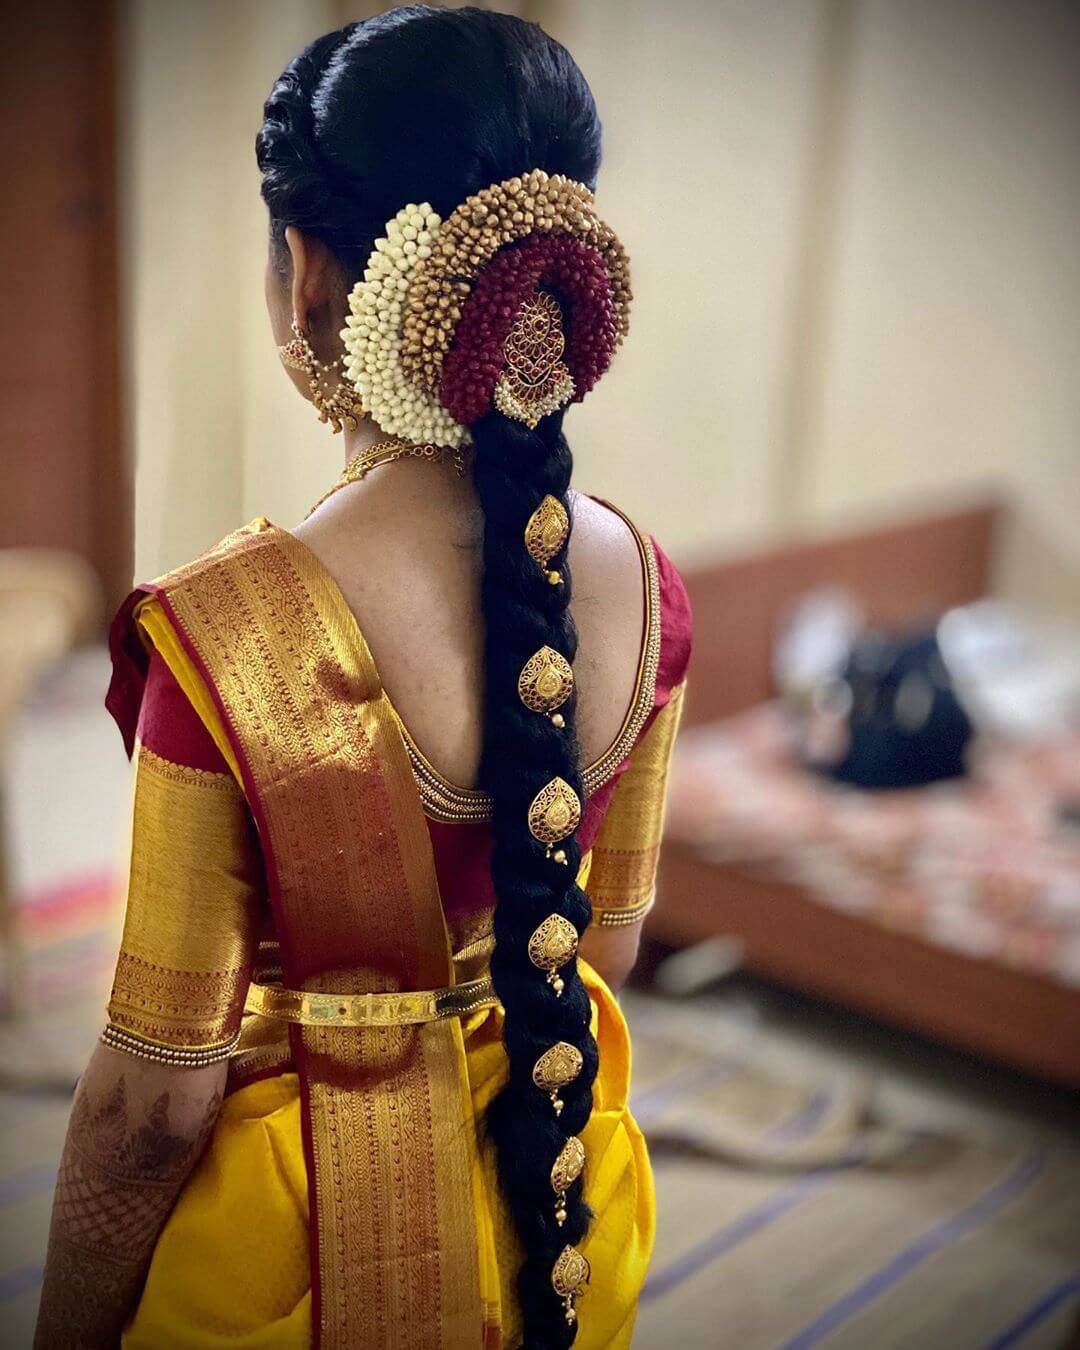 17 South Indian bridal hairstyles we dig  Get Inspiring Ideas for  Planning Your Perfect Wedding at fabweddings